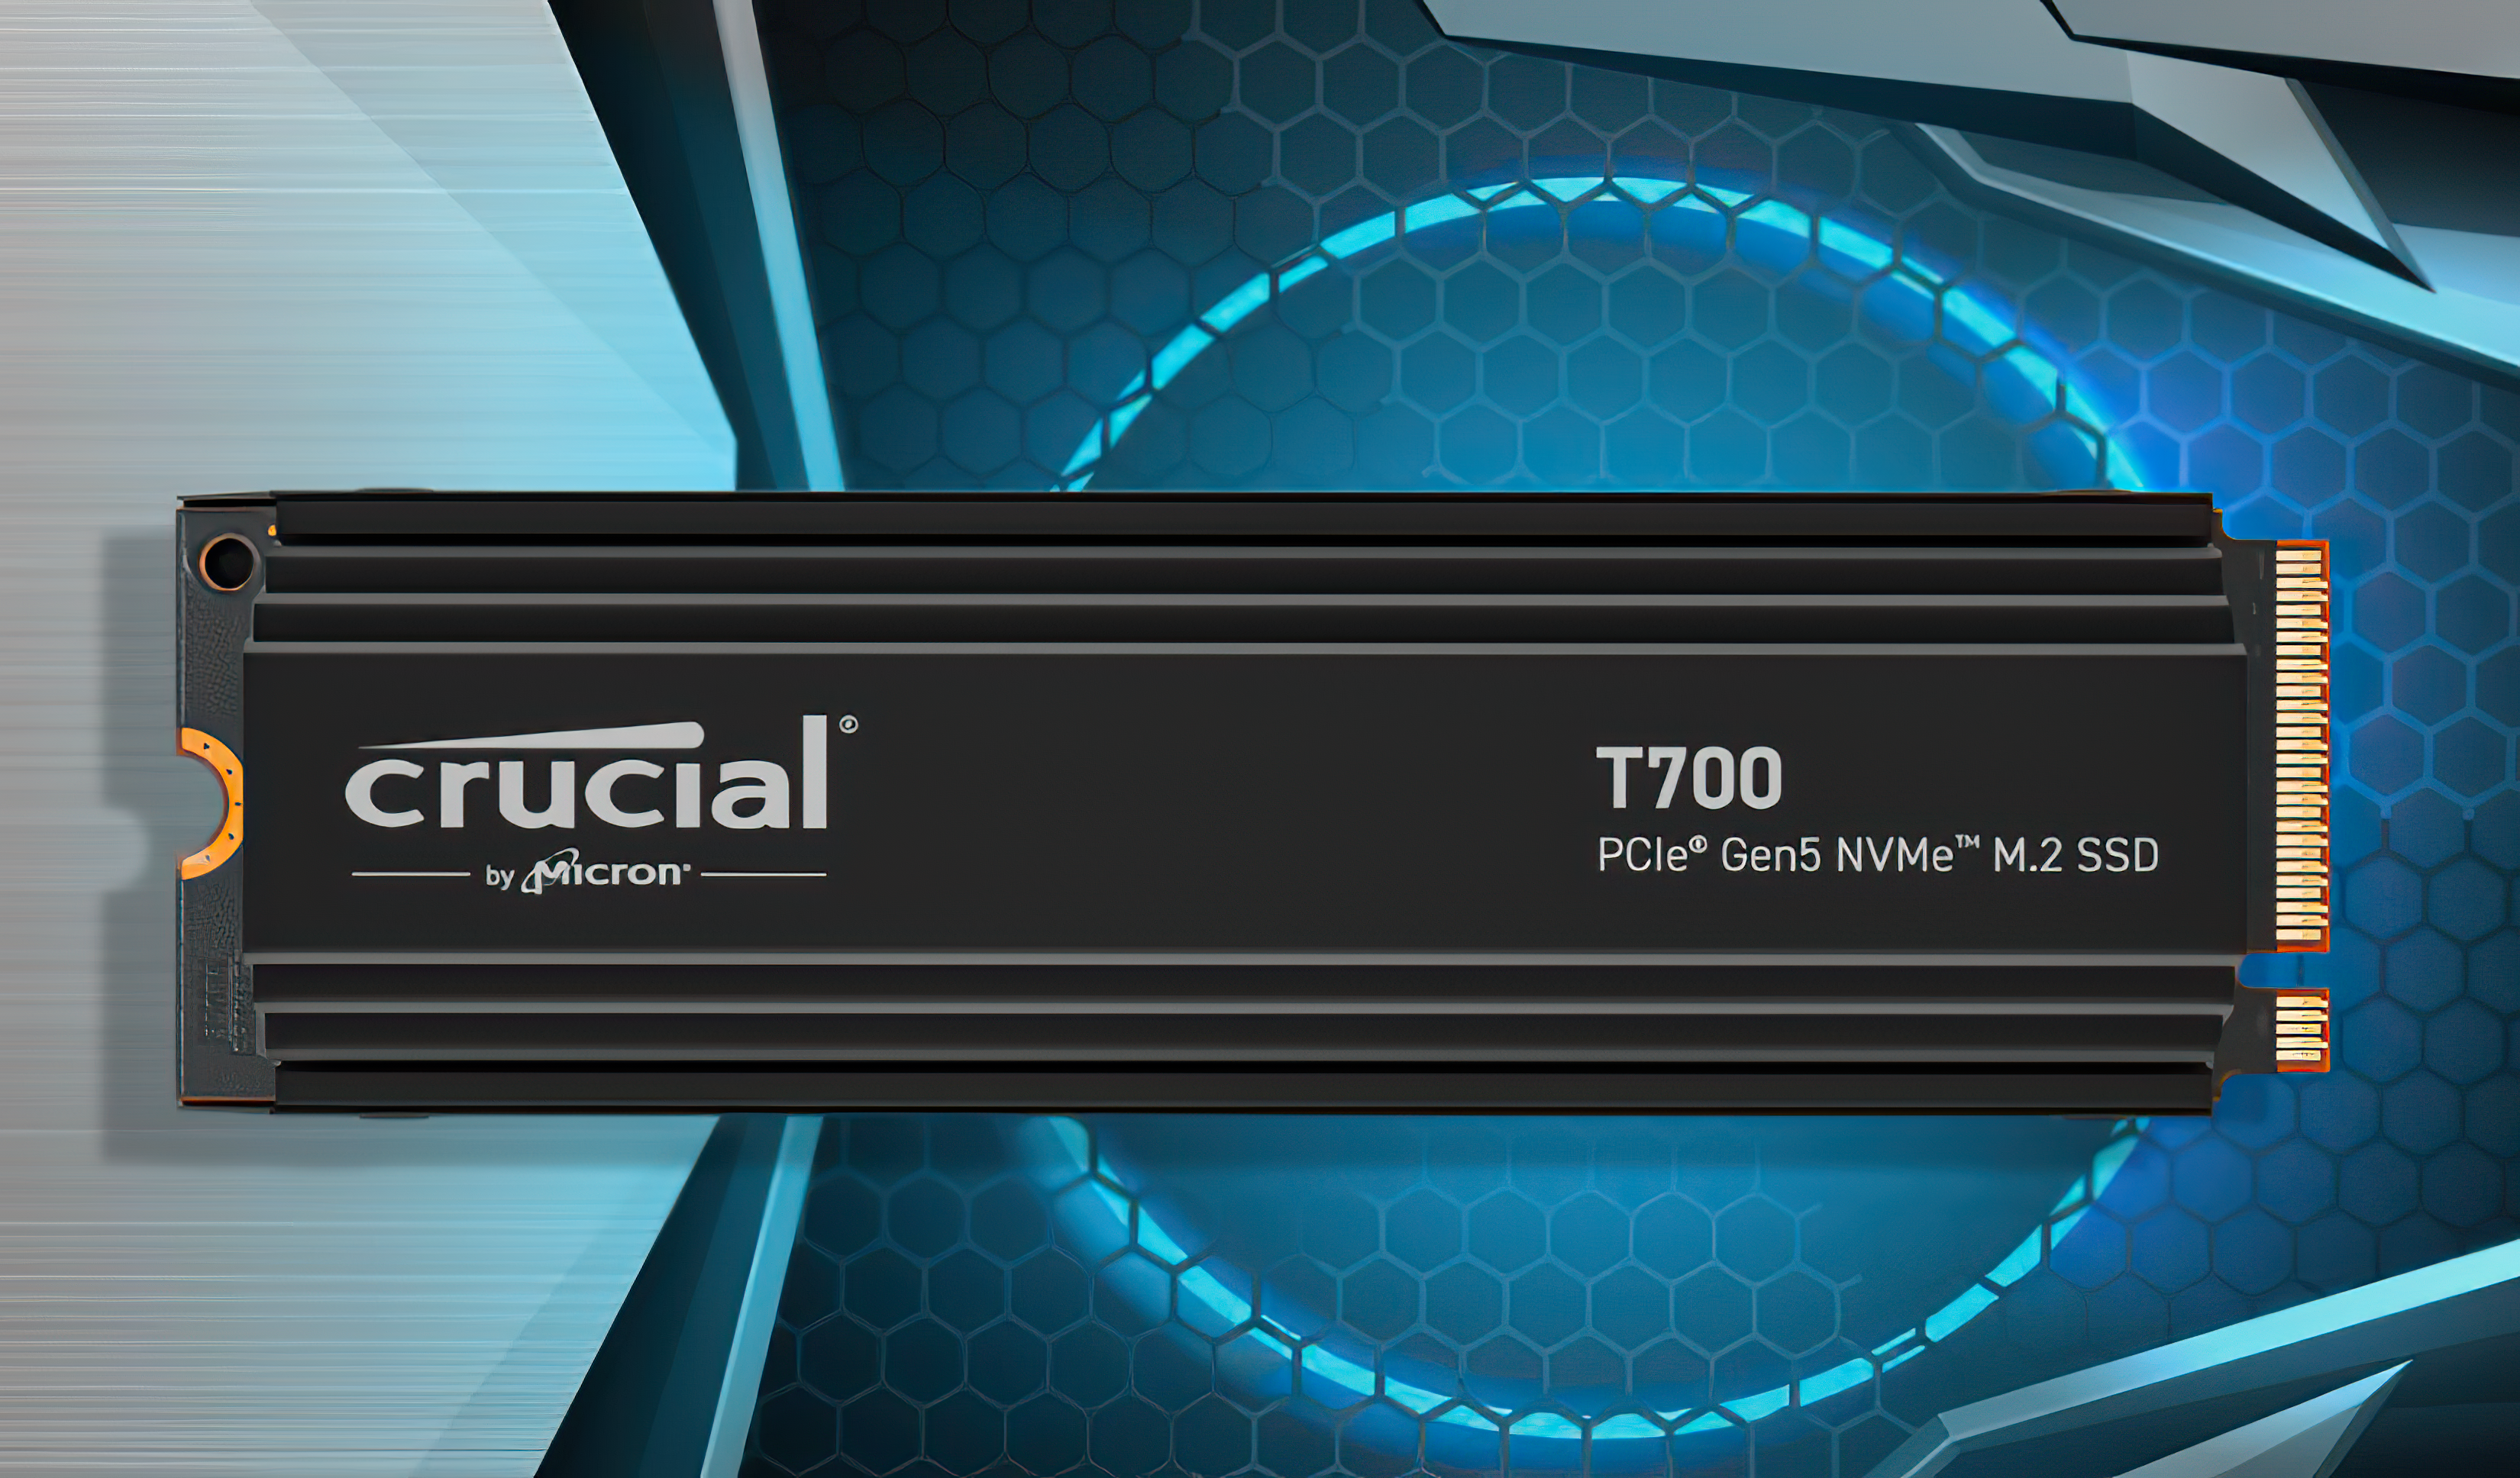 Crucial-T700-Gen5-NVMe-SSD-Phison-Micron-_1-gigapixel-standard-scale-4_00x.png